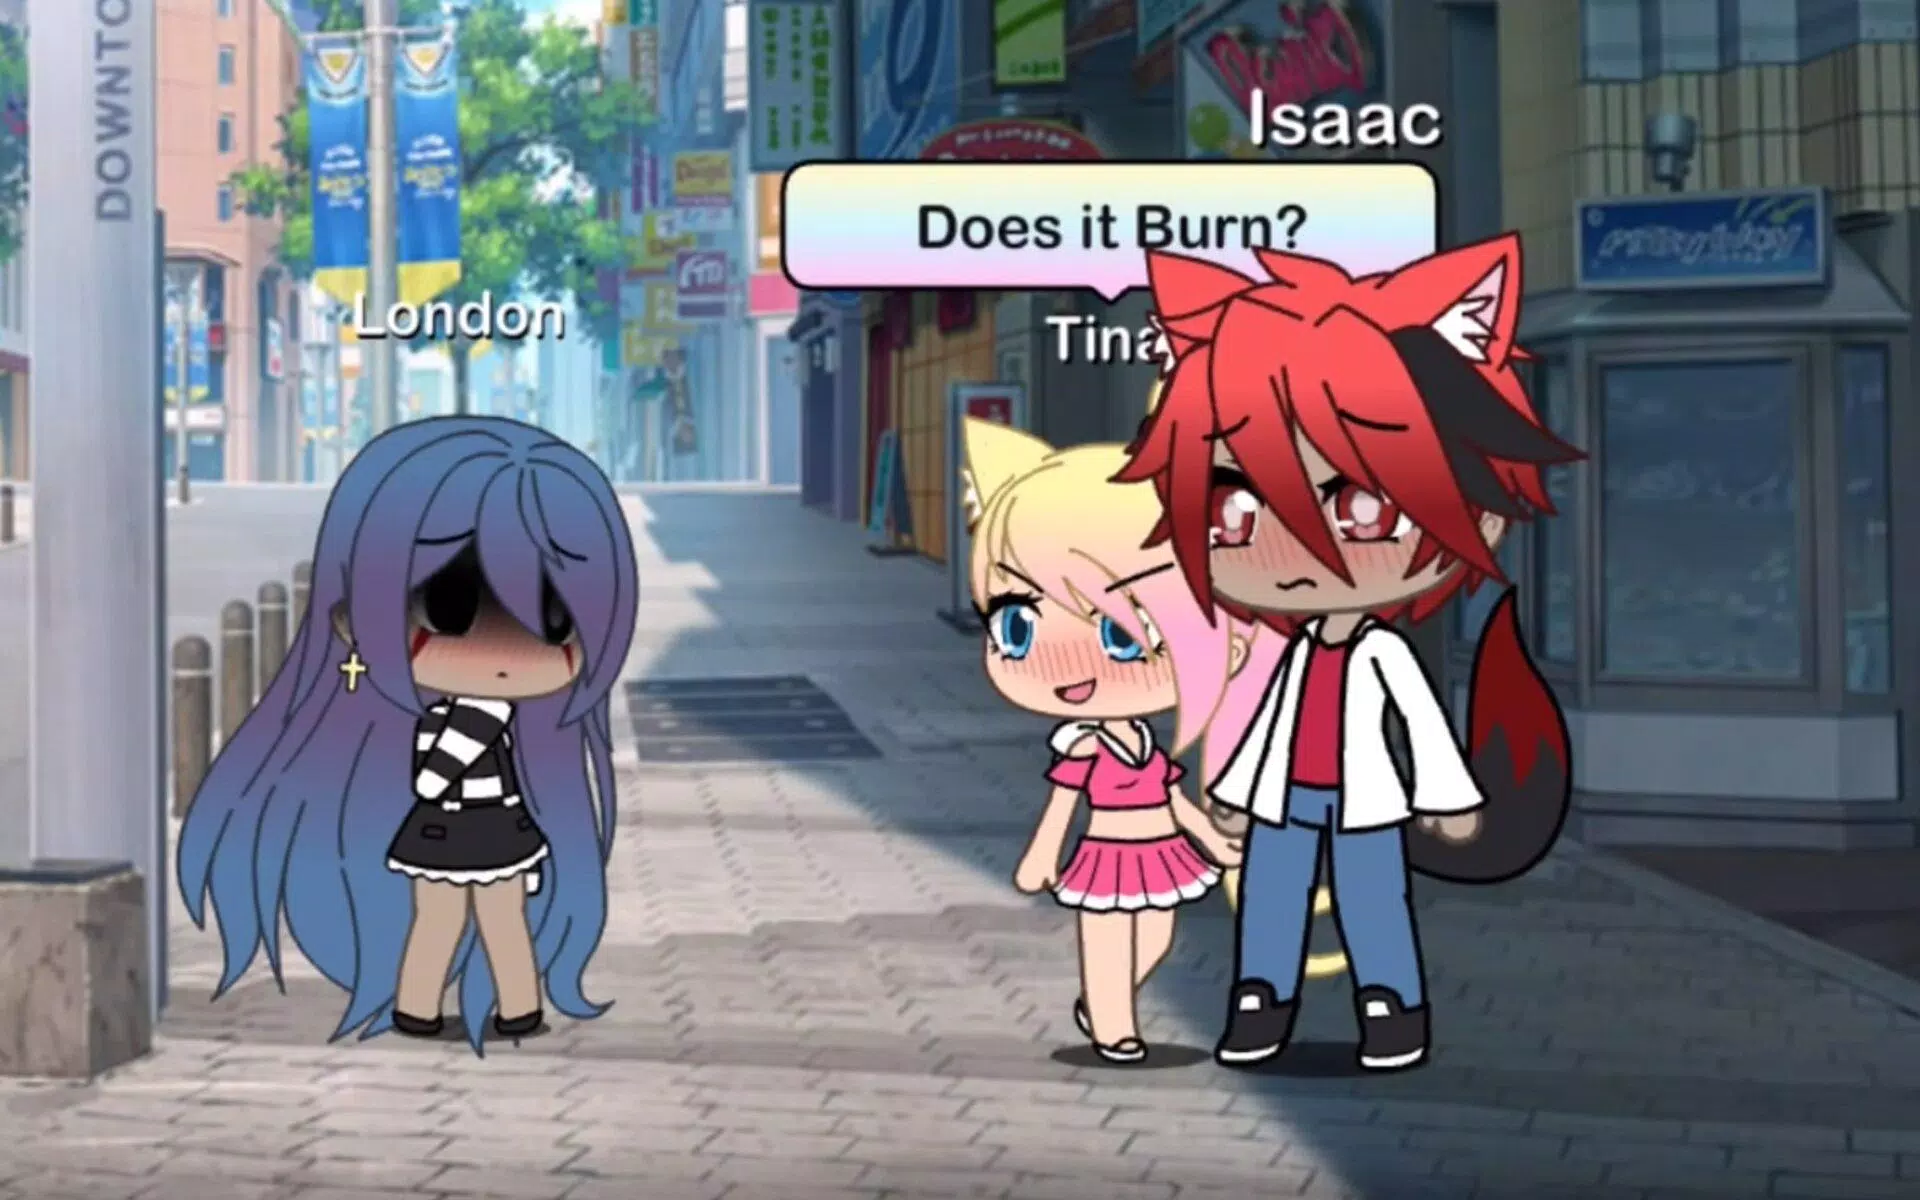 Gacha Life 2 APK Download for Android Free